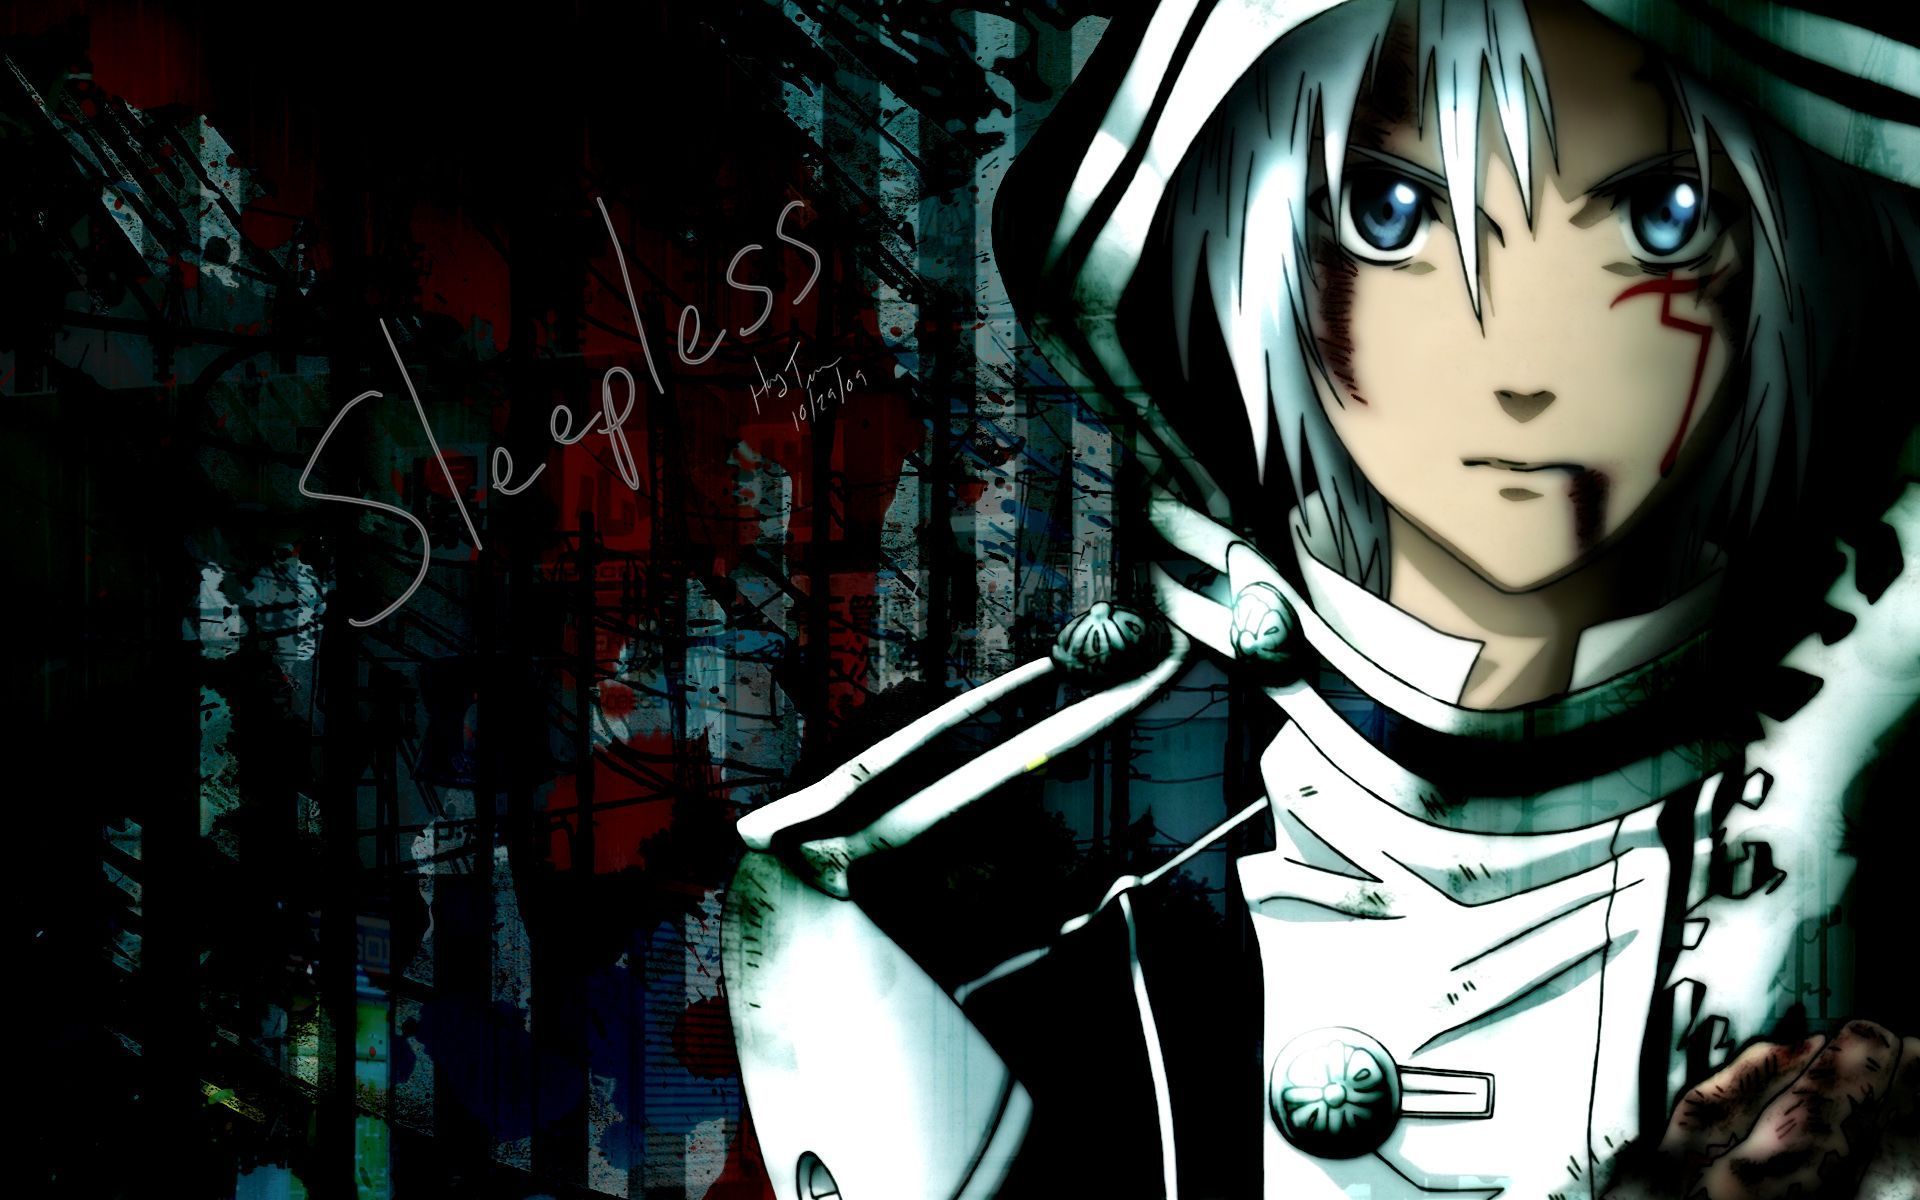 New home anime d gray man psp full hd wallpaper 4810 just another ...